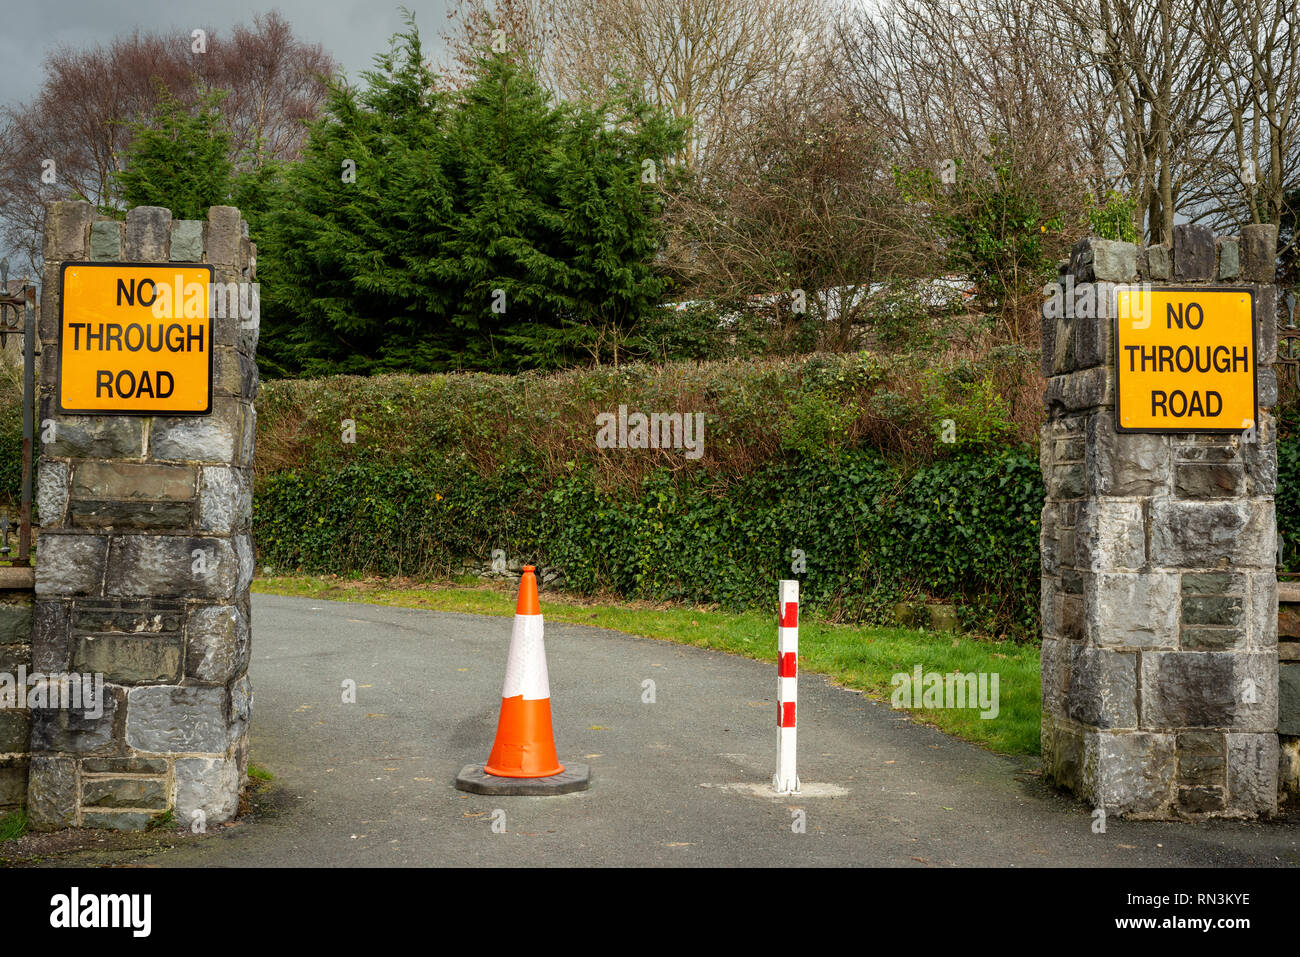 No through road signs at countryside road gate in Killarney, Ireland Stock Photo